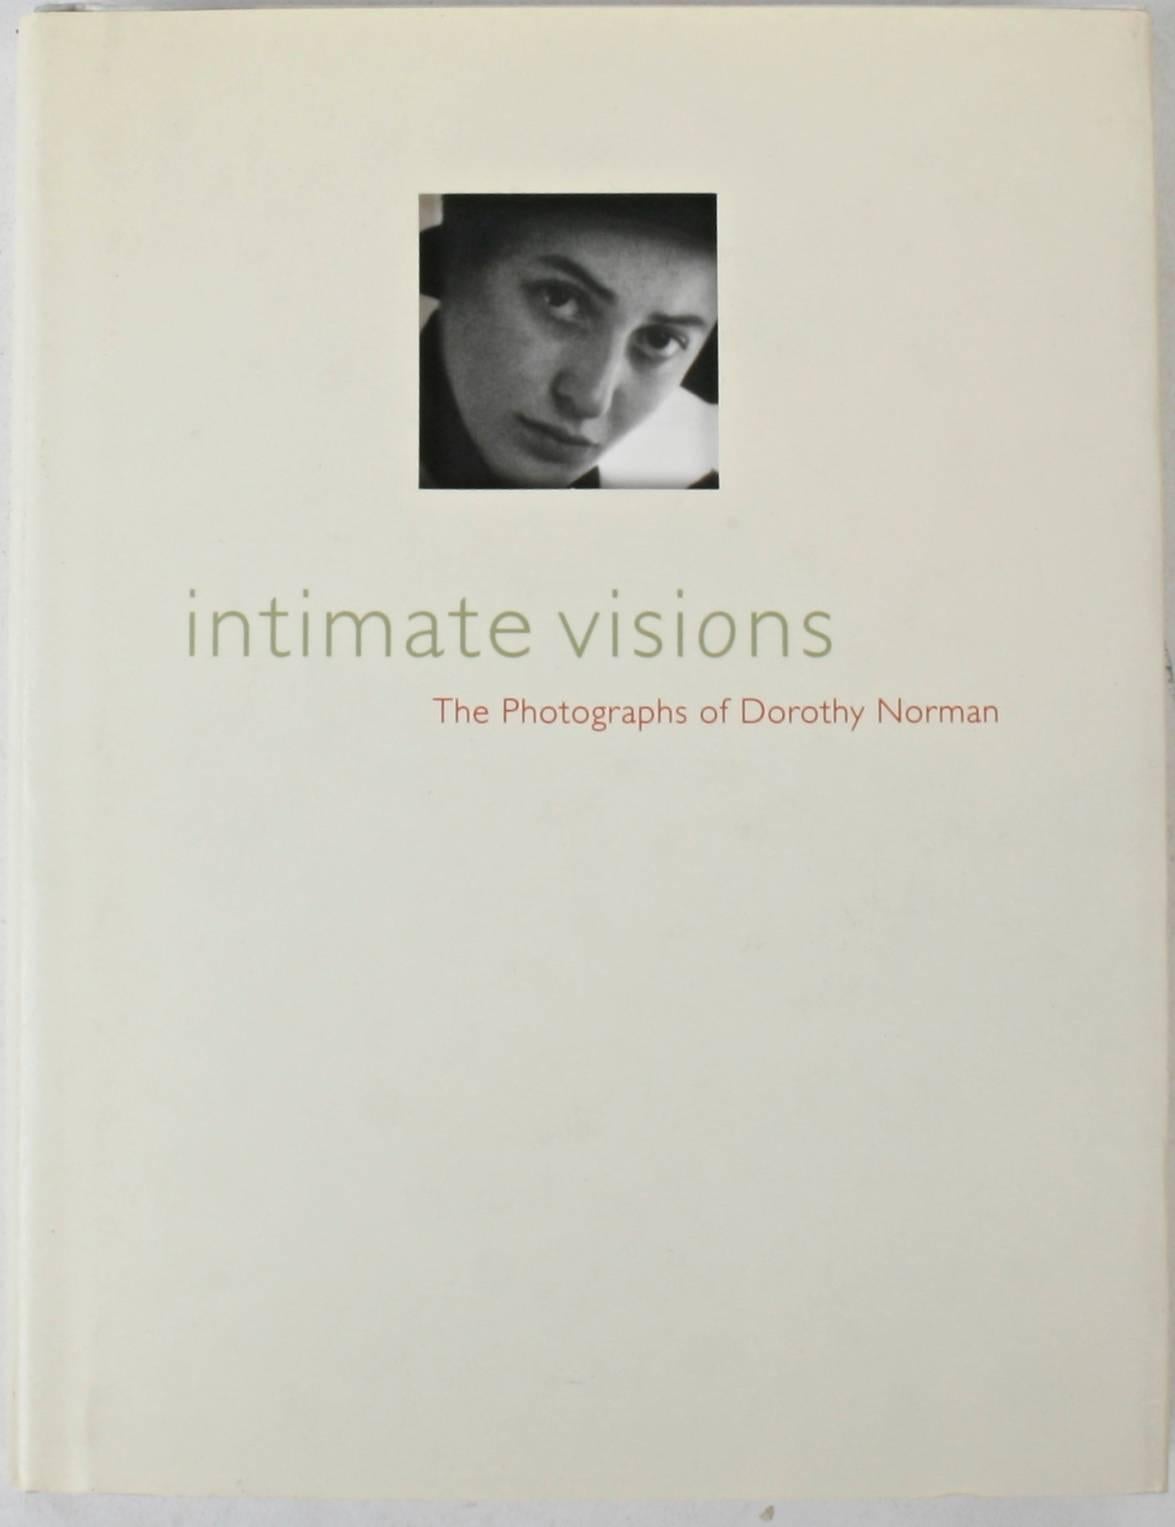 Intimate Visions: The Photography of Dorothy Norman by Miles Barth. Chronicle Books, San Francisco, 1993. She was best known for her long association with Alfred Stieglitz and was an accomplished photographer in her own right. Her life was motivated